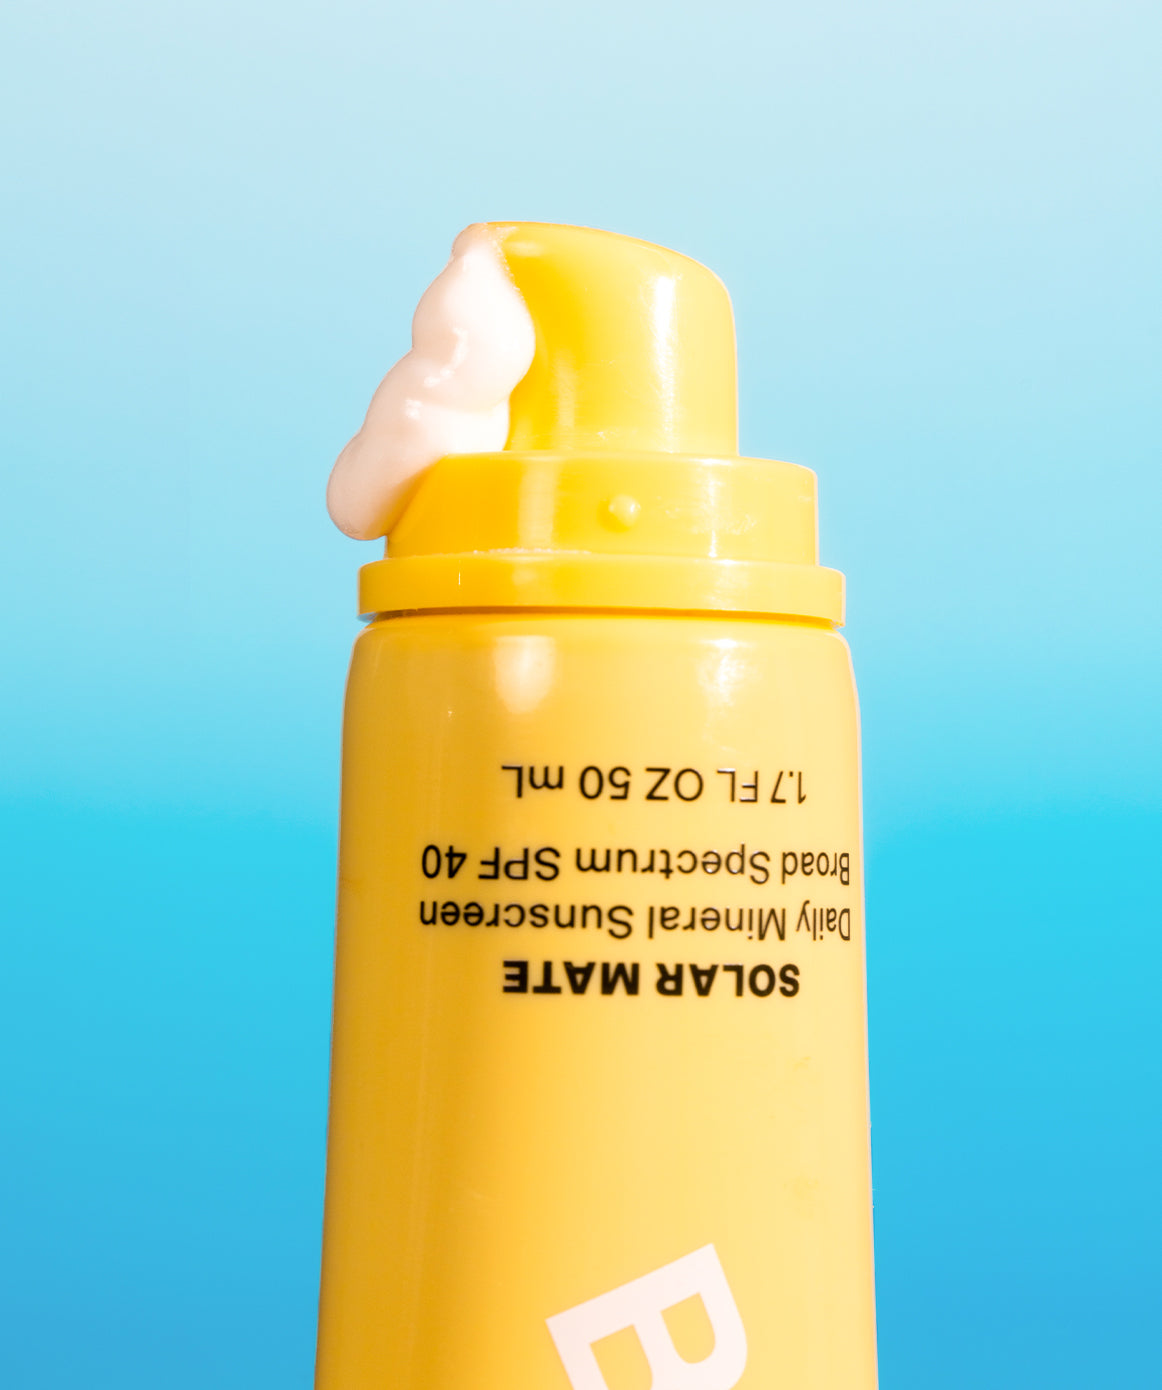 Skincare product. Daily mineral sunscreen SPF40